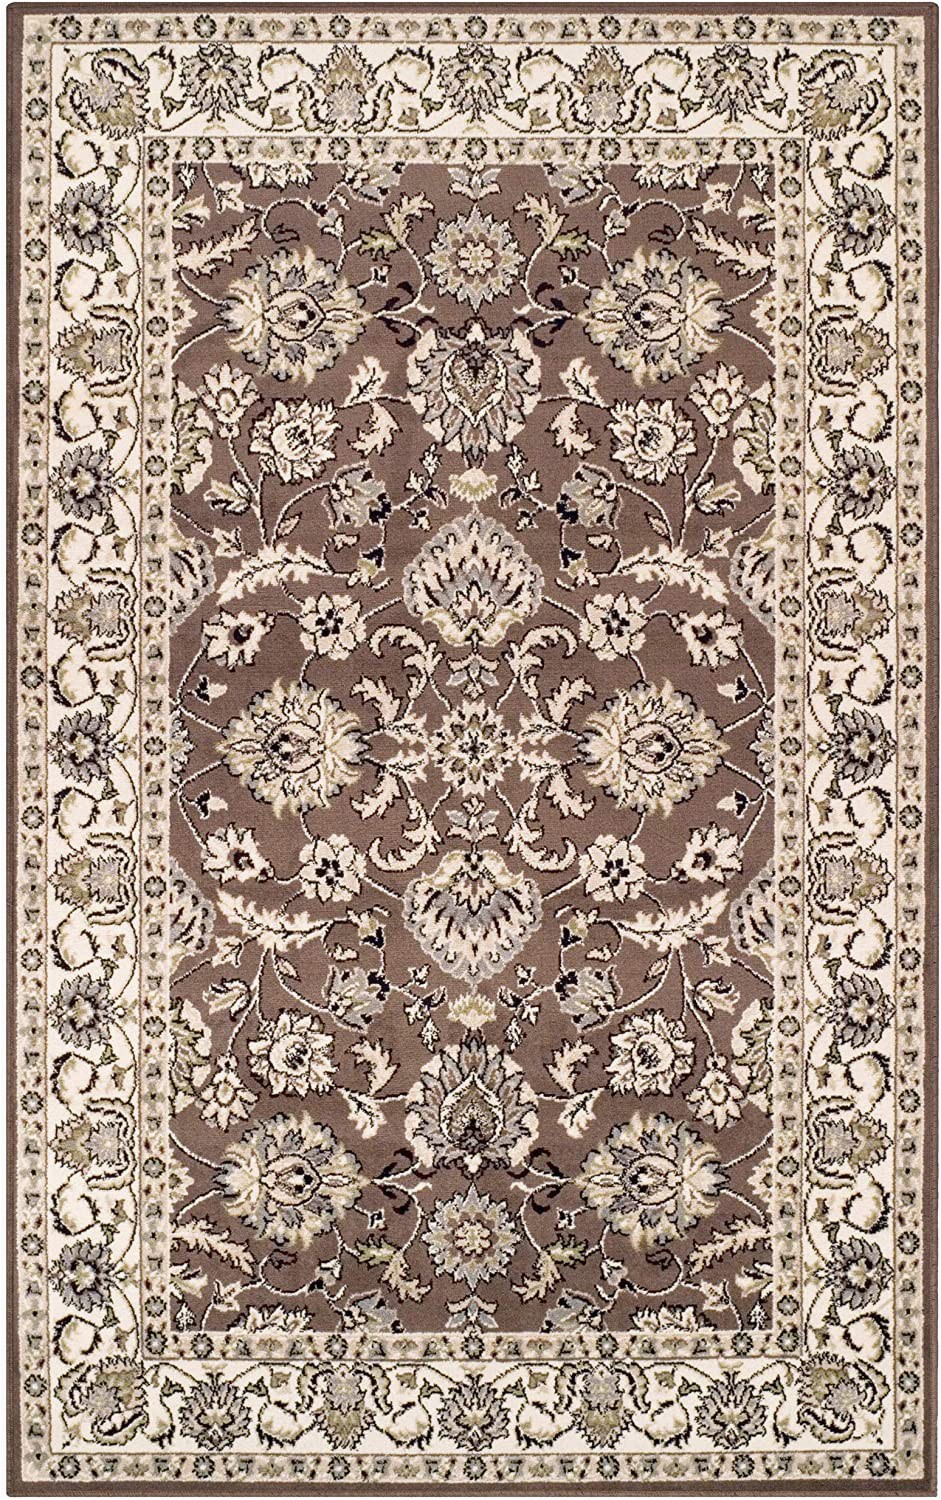 8 by 10 area Rugs Cheap Superior Lille 8 X 10 area Rug Contemporary Living Room & Bedroom area Rug Anti Static and Water Repellent for Residential or Mercial Use